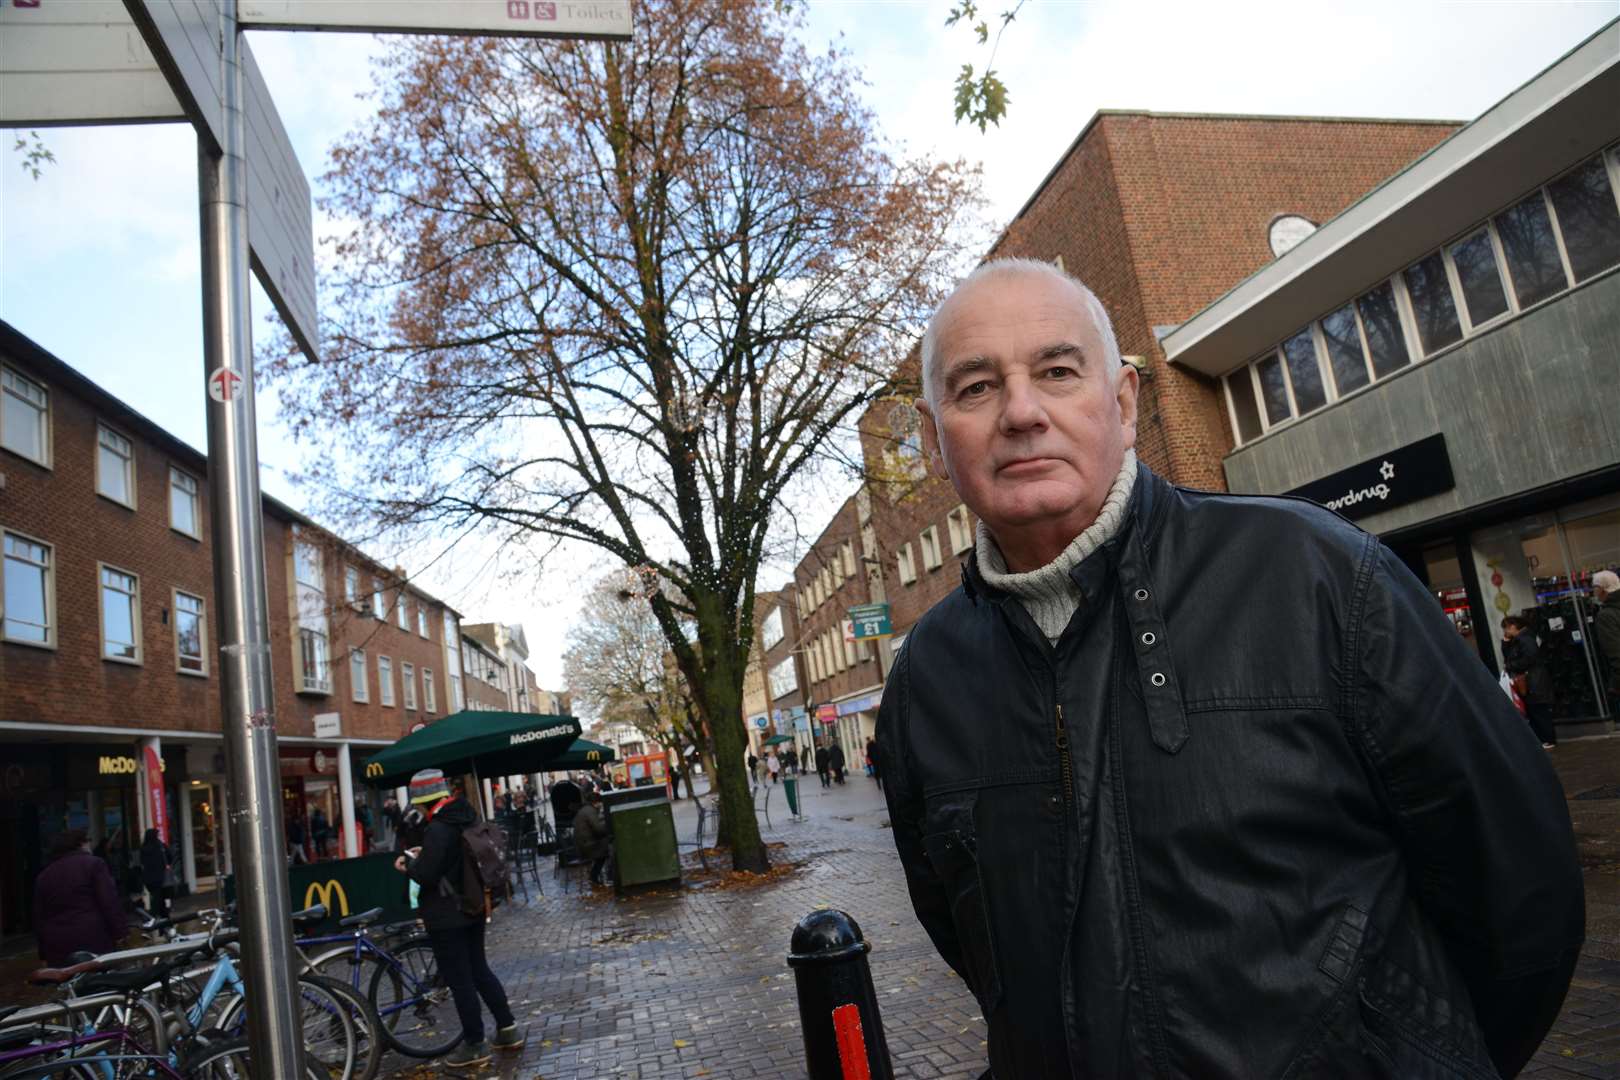 Canterbury campaigner David Kemsley believes the scheme will completely alter the balance of the city